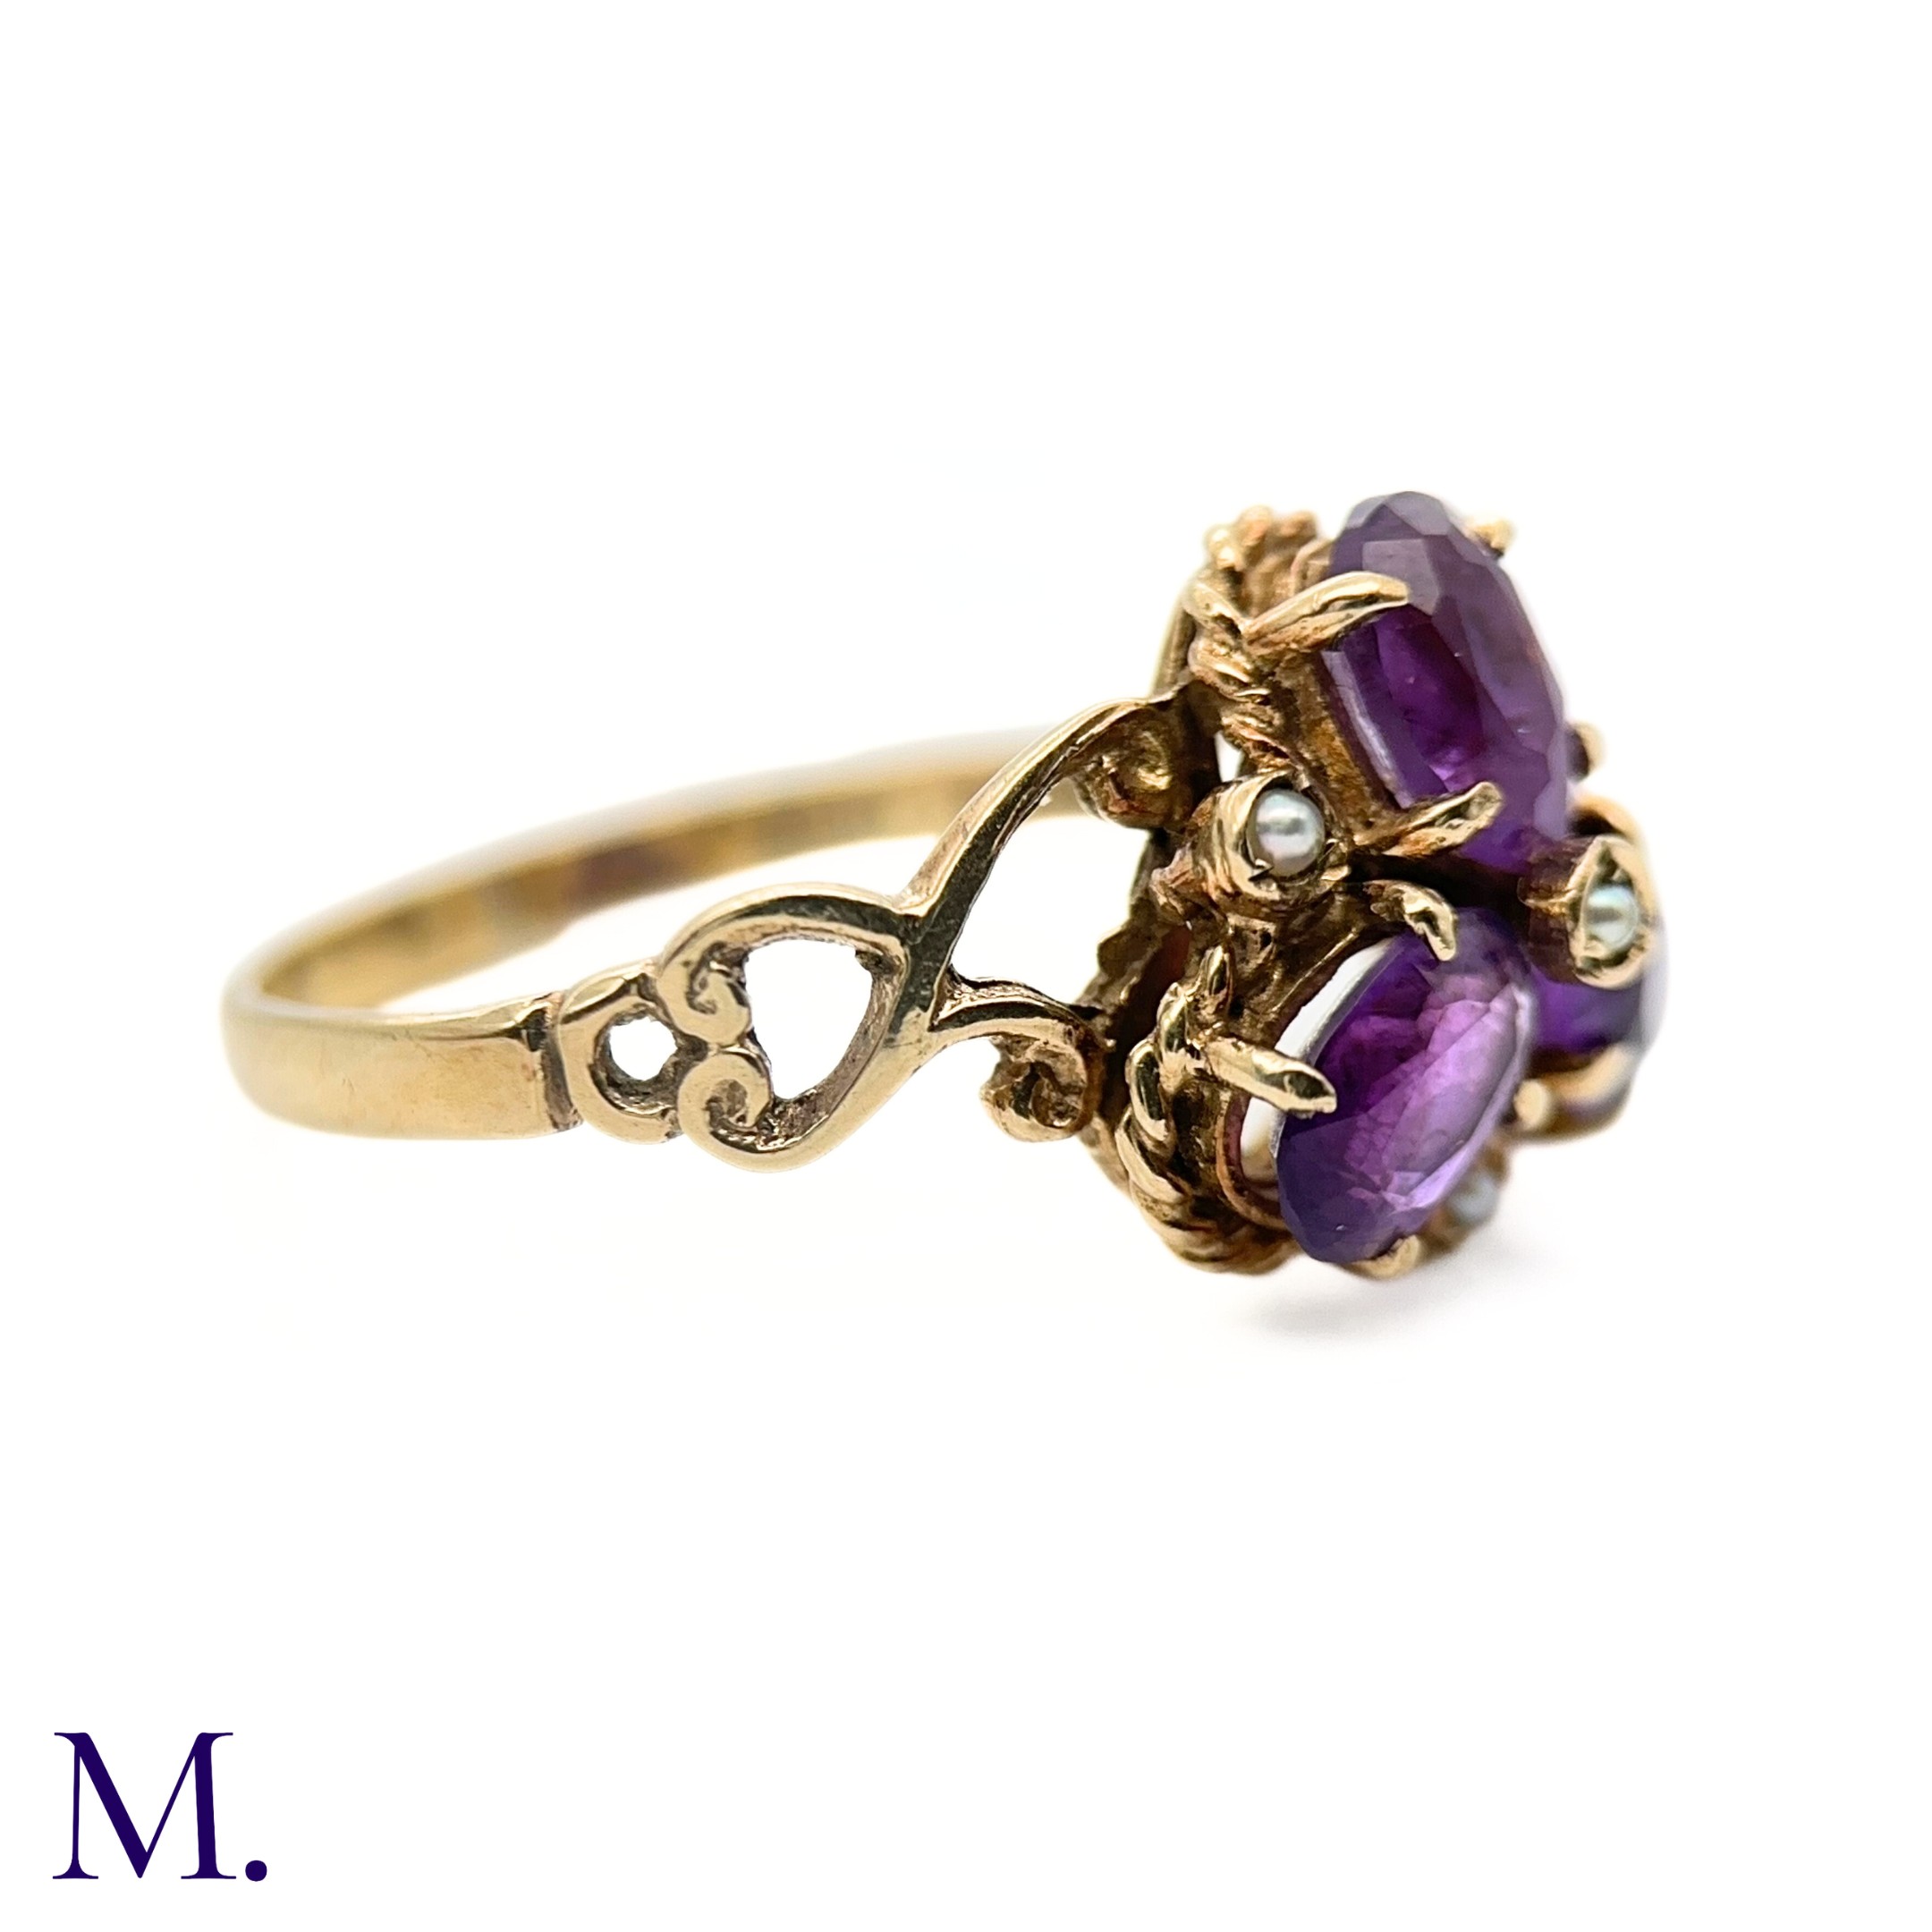 NO RESERVE - An Amethyst and Pearl Ring - Image 7 of 8